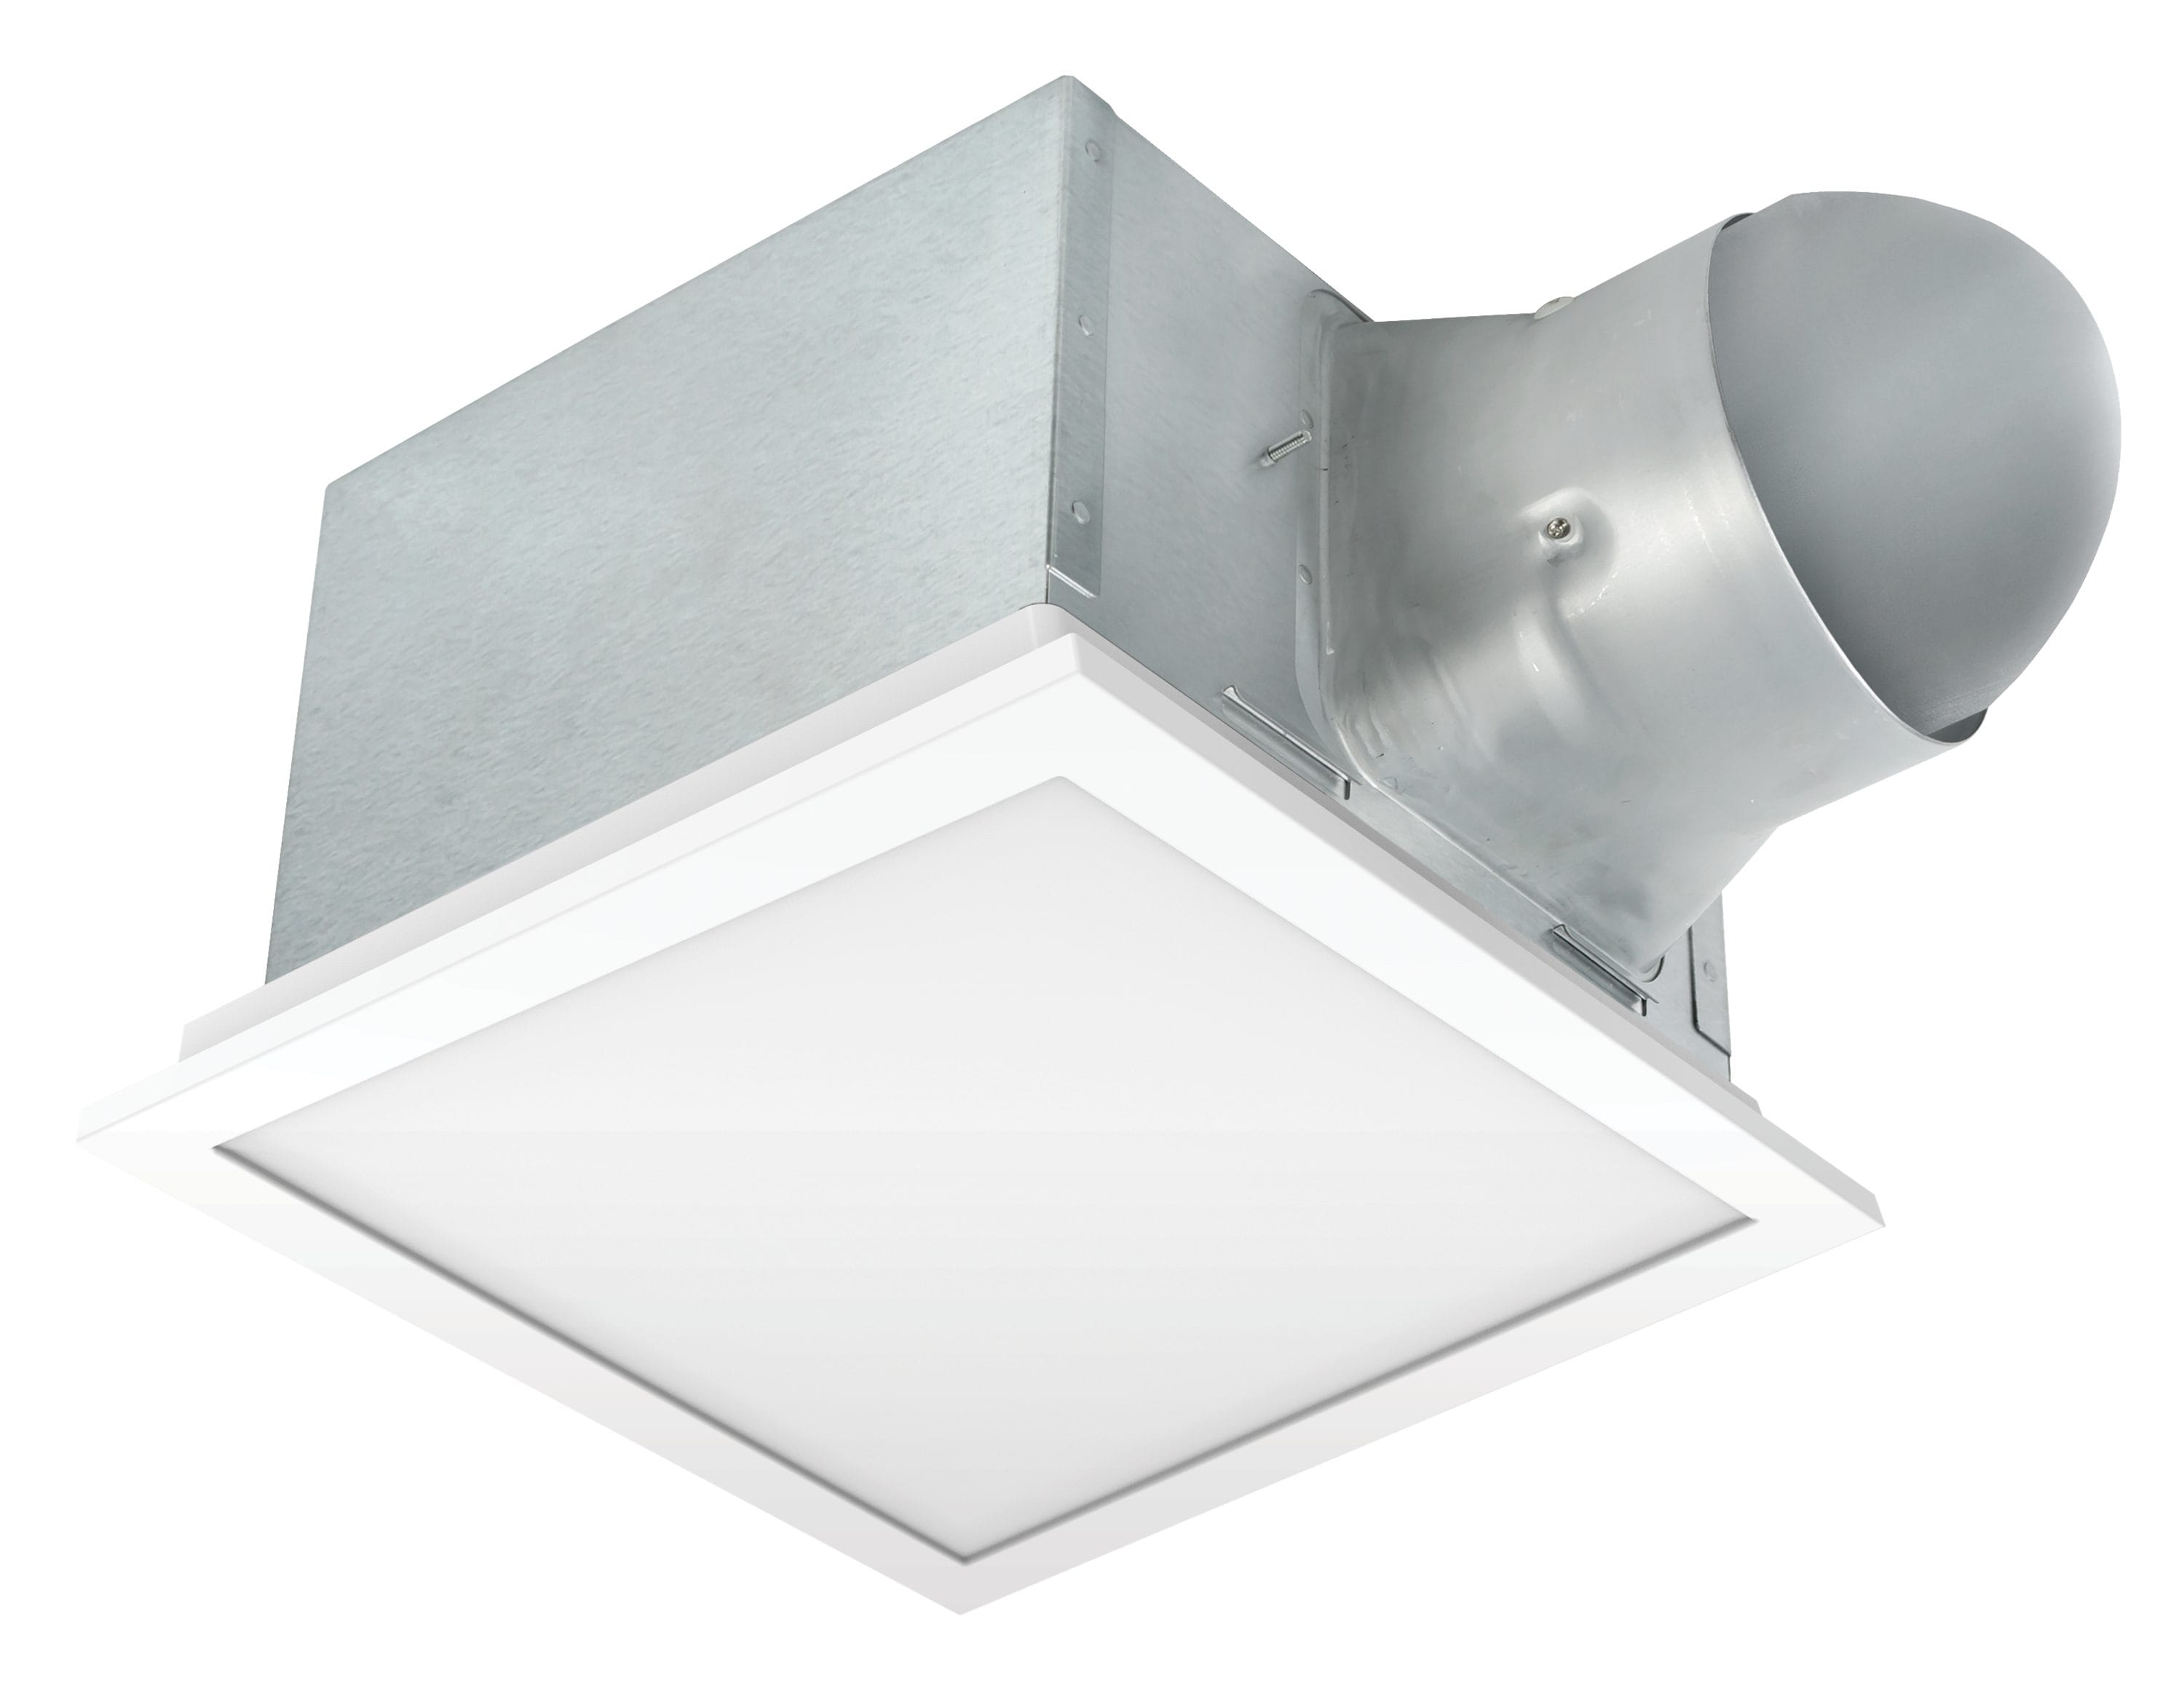 Utilitech 1-Sone 150-CFM White Decorative Lighted Bathroom Fan ENERGY STAR in the Bathroom Fans & Heaters department at Lowes.com